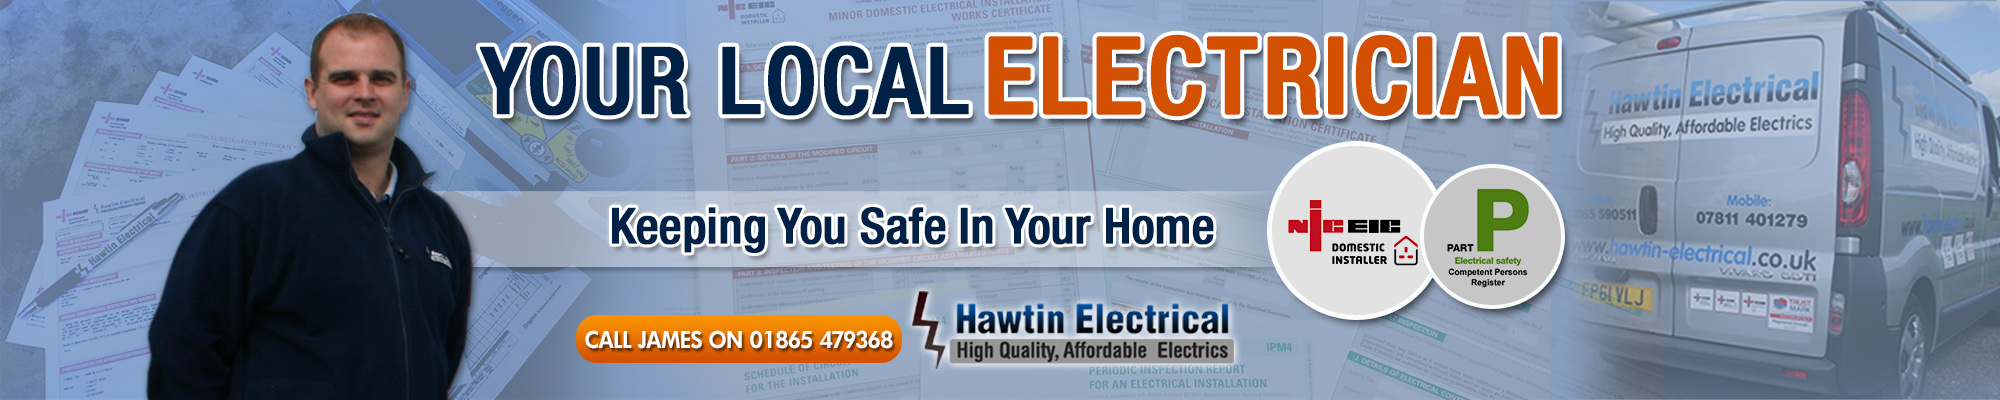 James Hawtin - Your Local Electrician in Oxford